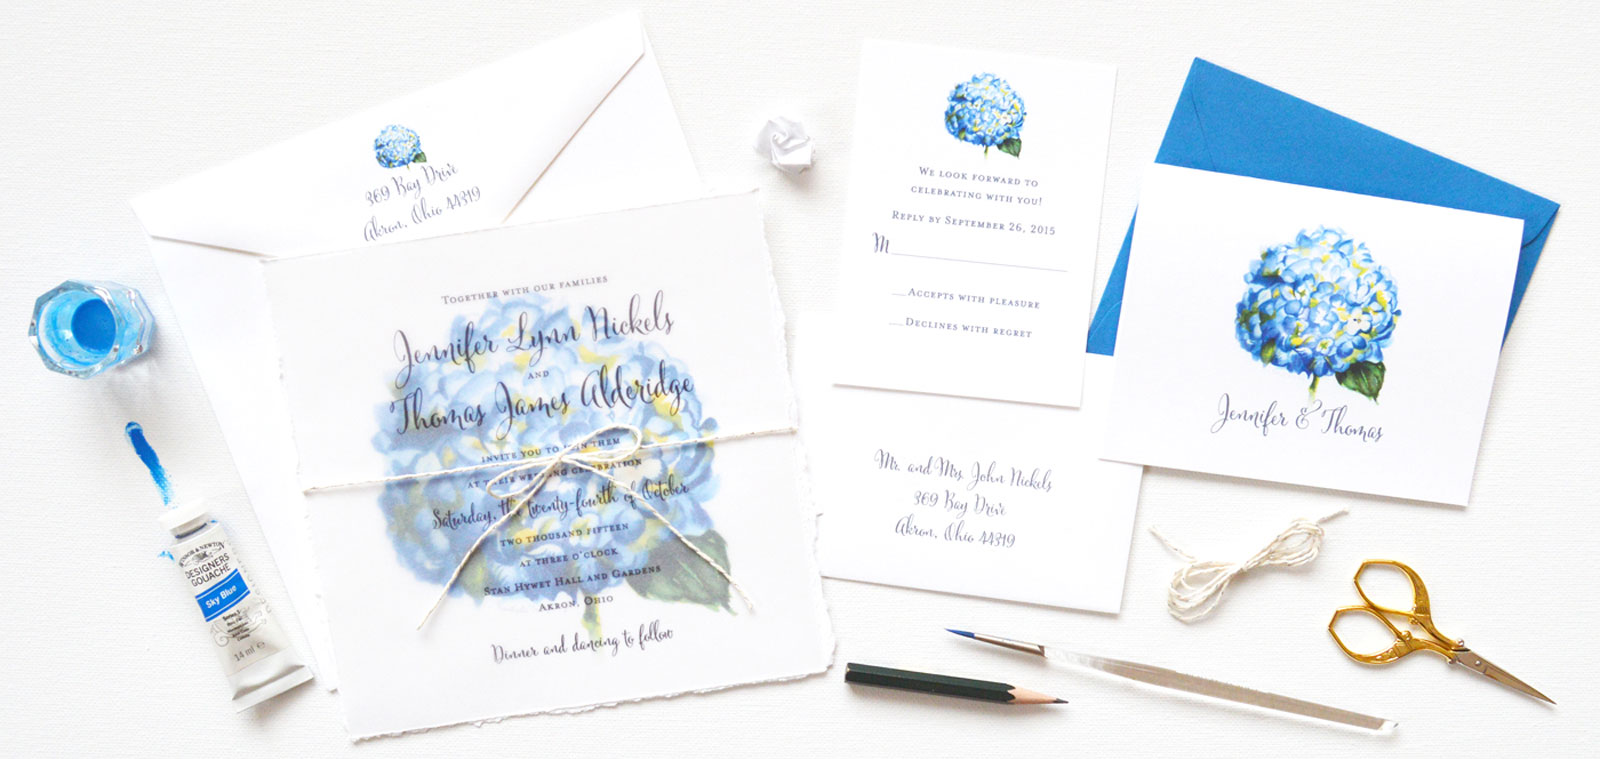 Unique floral wedding invitations with watercolor hydrangea flowers by artist Michelle Mospens.